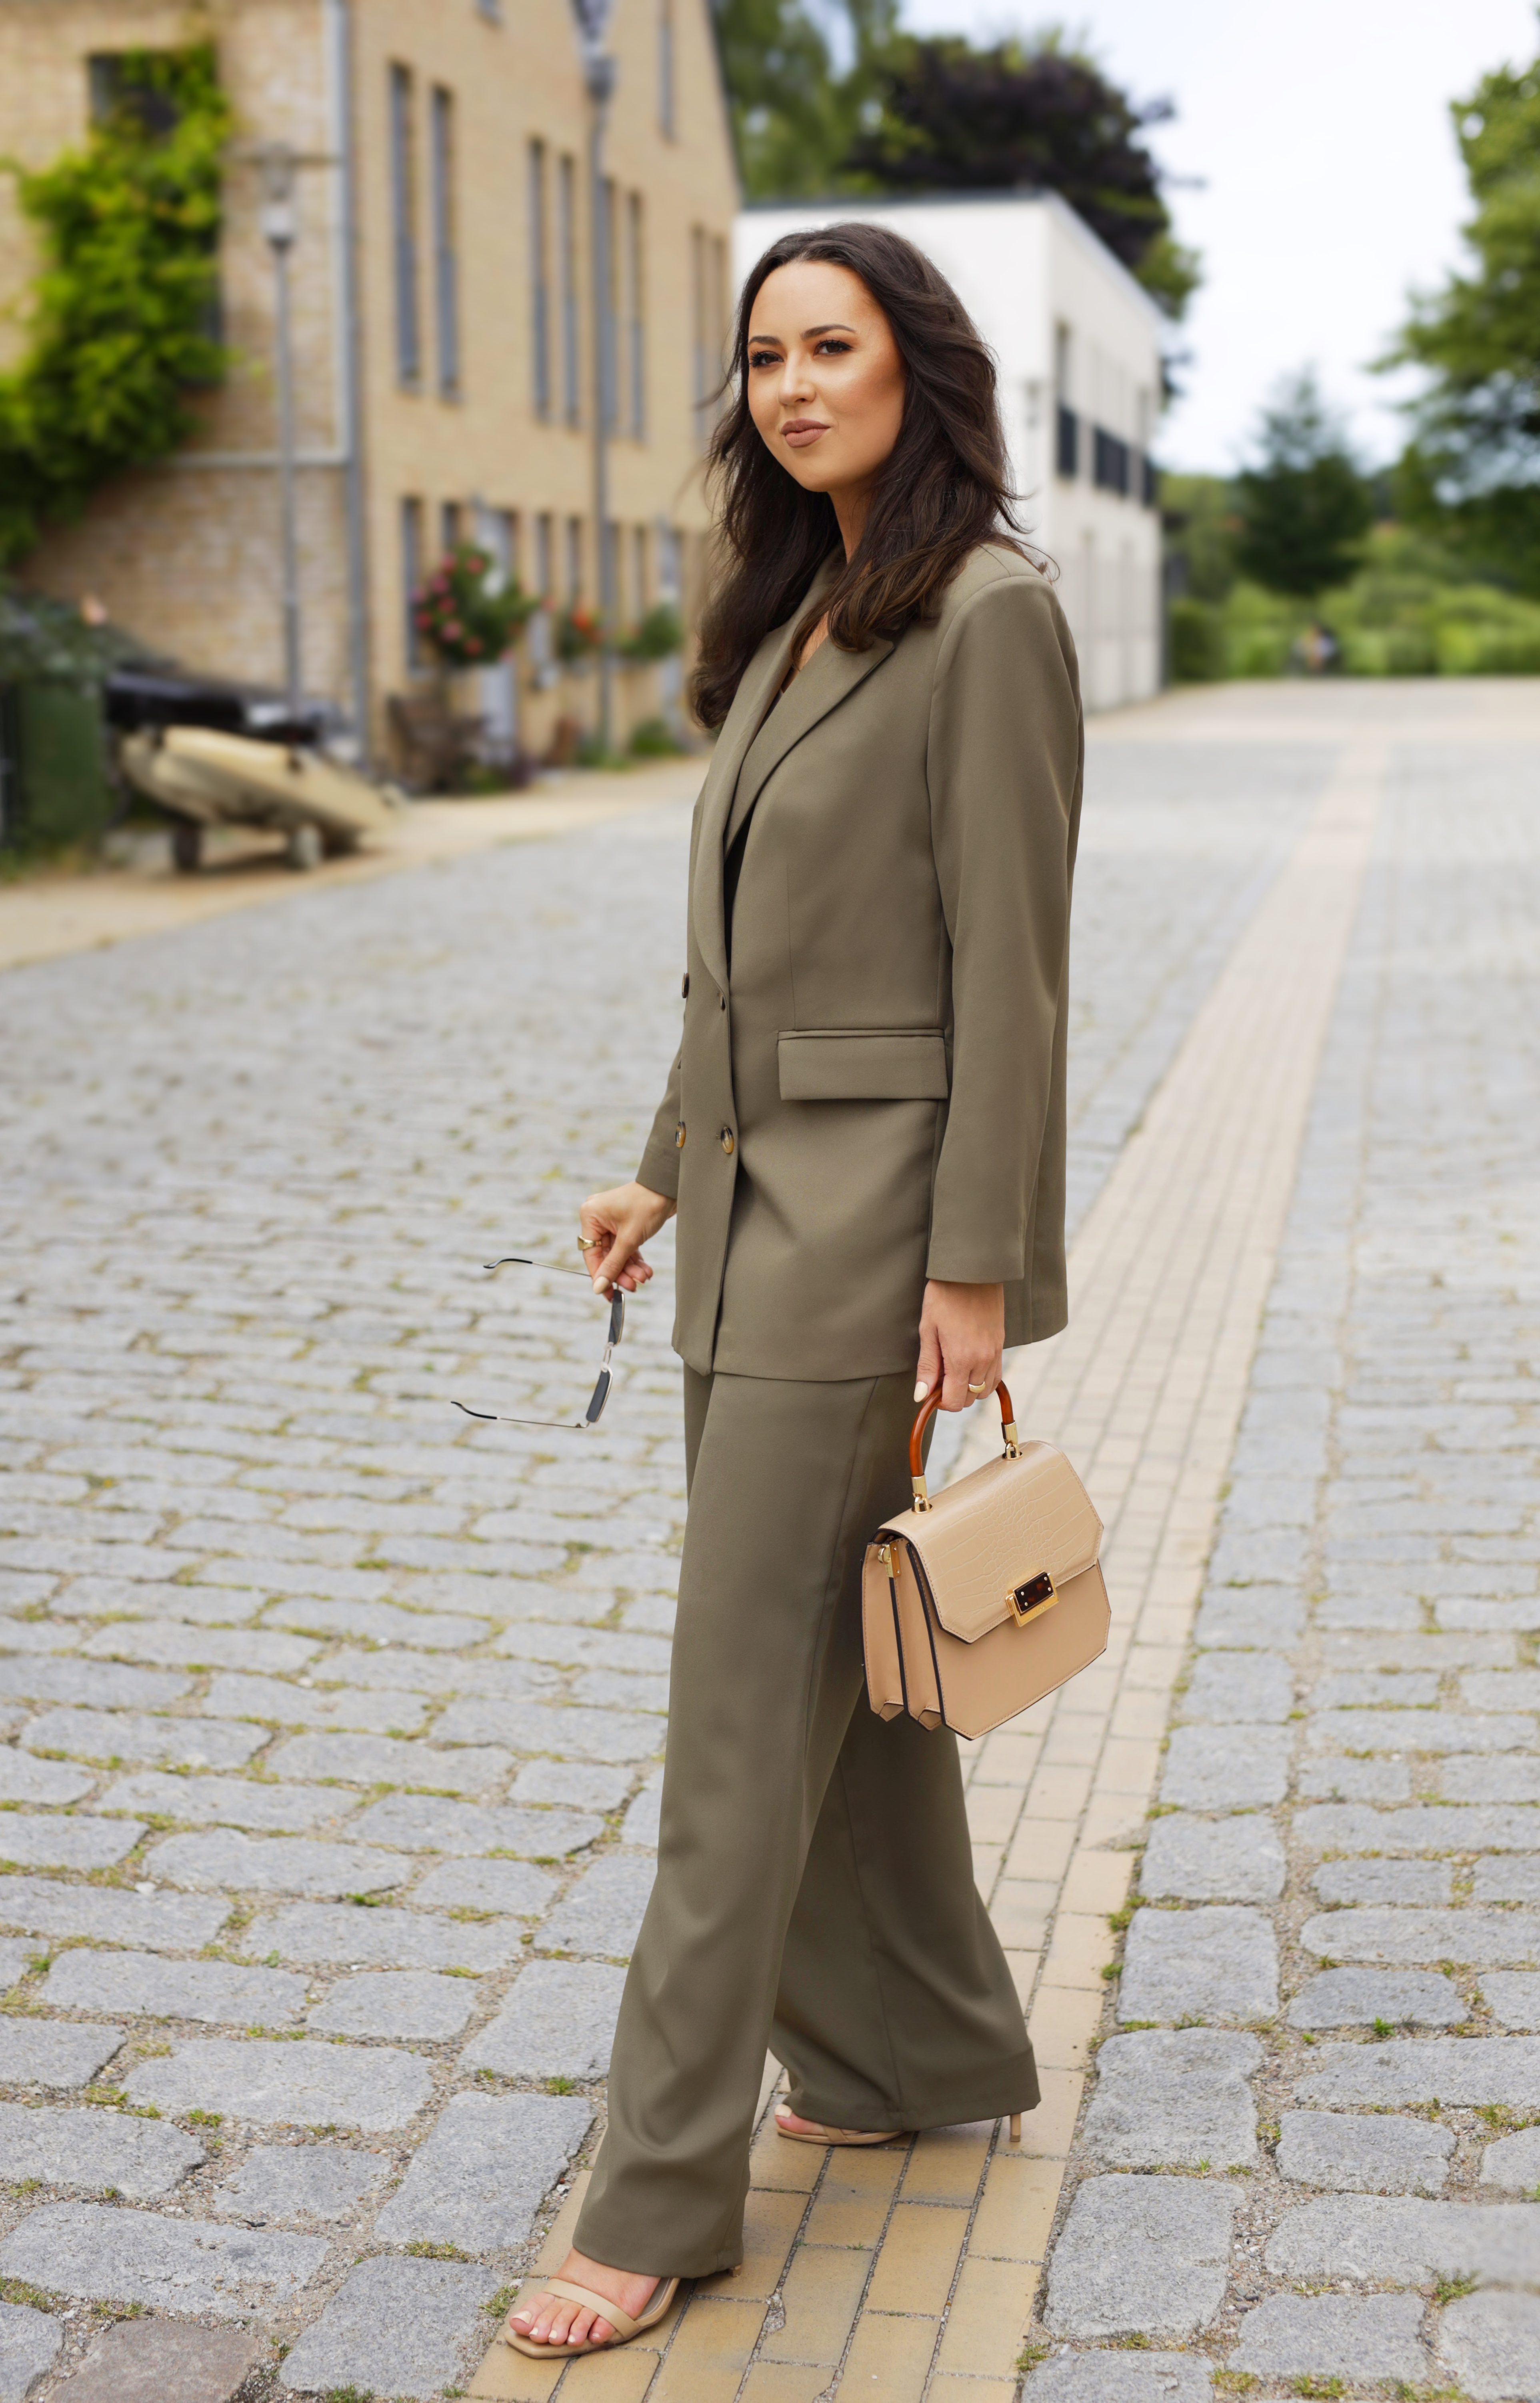 Olive Green Suit Outfit